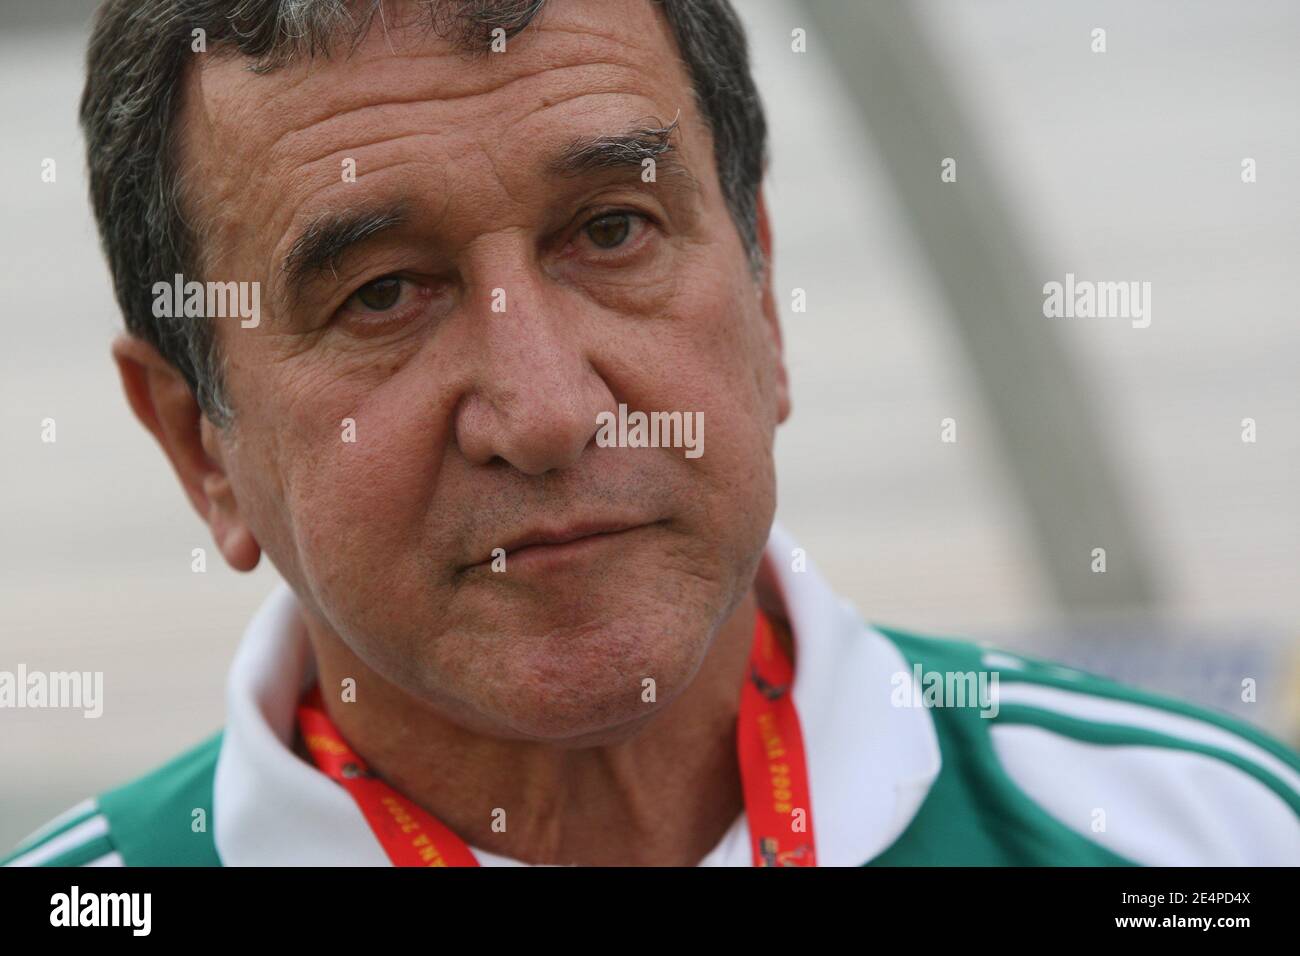 South Africa' s coach Parreira during the African Cup of Nations soccer match, Senegal vs South Africa in Kumasi, Ghana on January 31, 2008. The match ended in a 1-1 draw. Senegal failed to qualify for the next round of the competition. Photo by Steeve McMay/Cameleon/ABACAPRESS.COM Stock Photo